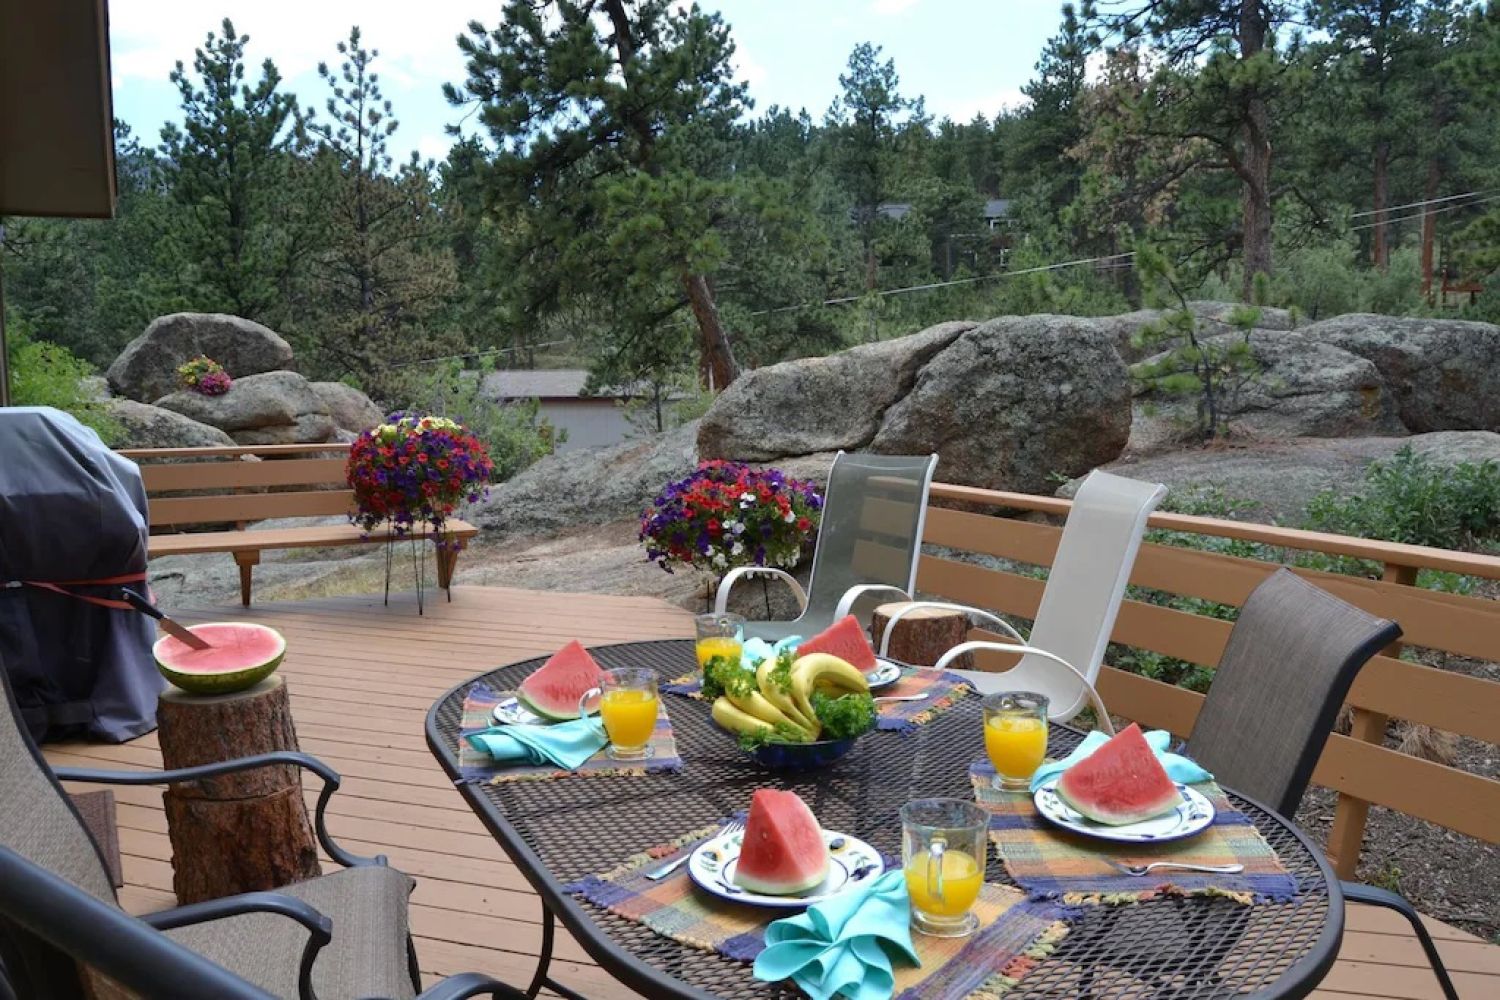 Bear House - Enjoy nature and breakfast all in one from the privacy of your deck with a grill and large patio table.